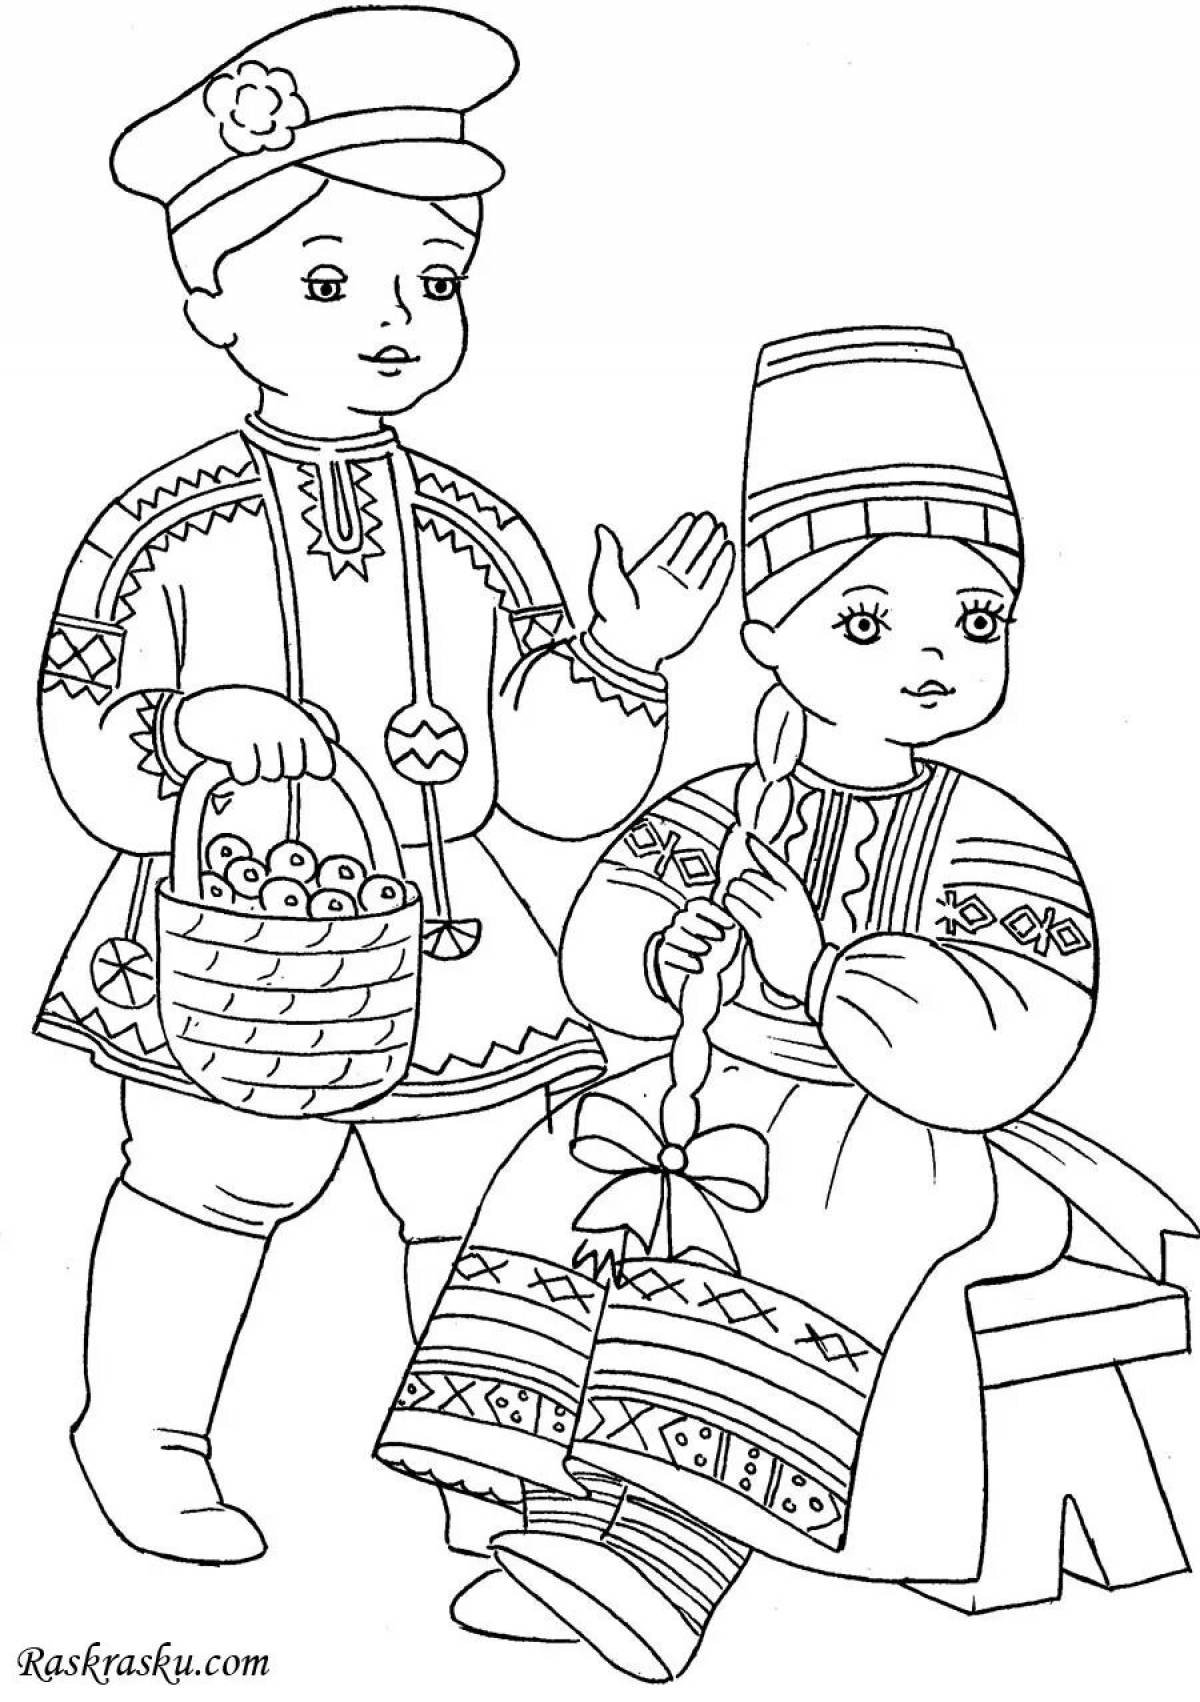 Russian traditions for kids #20